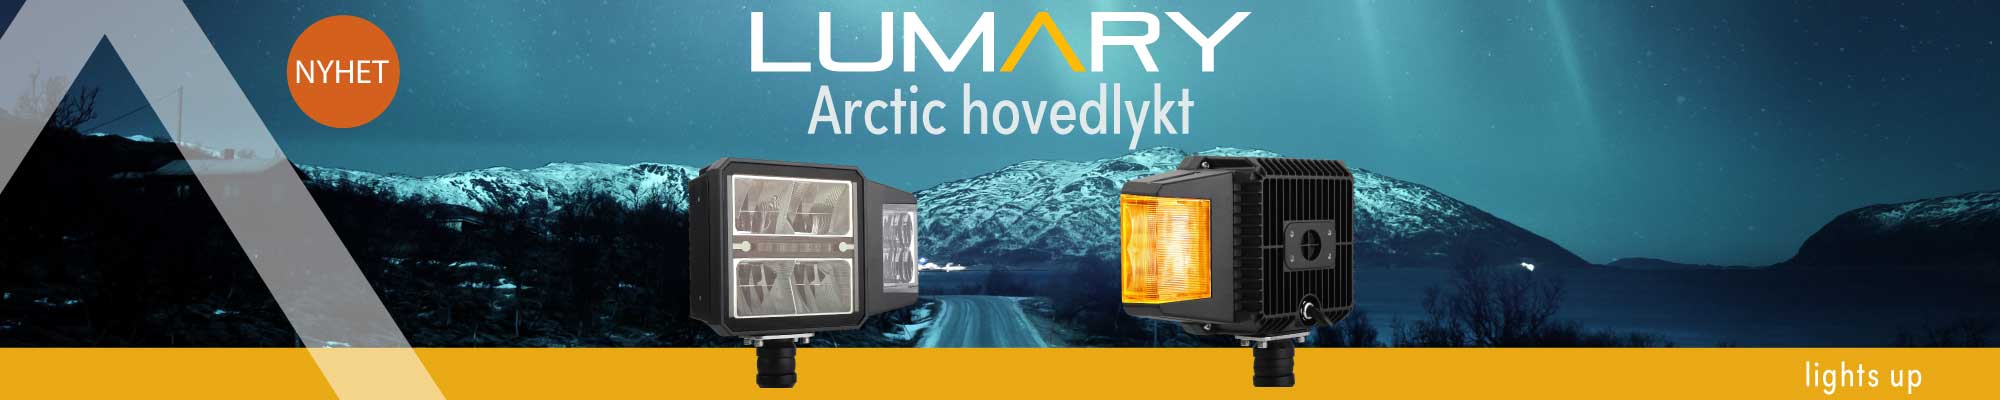 Lumary Arctic hovedlykt med varme